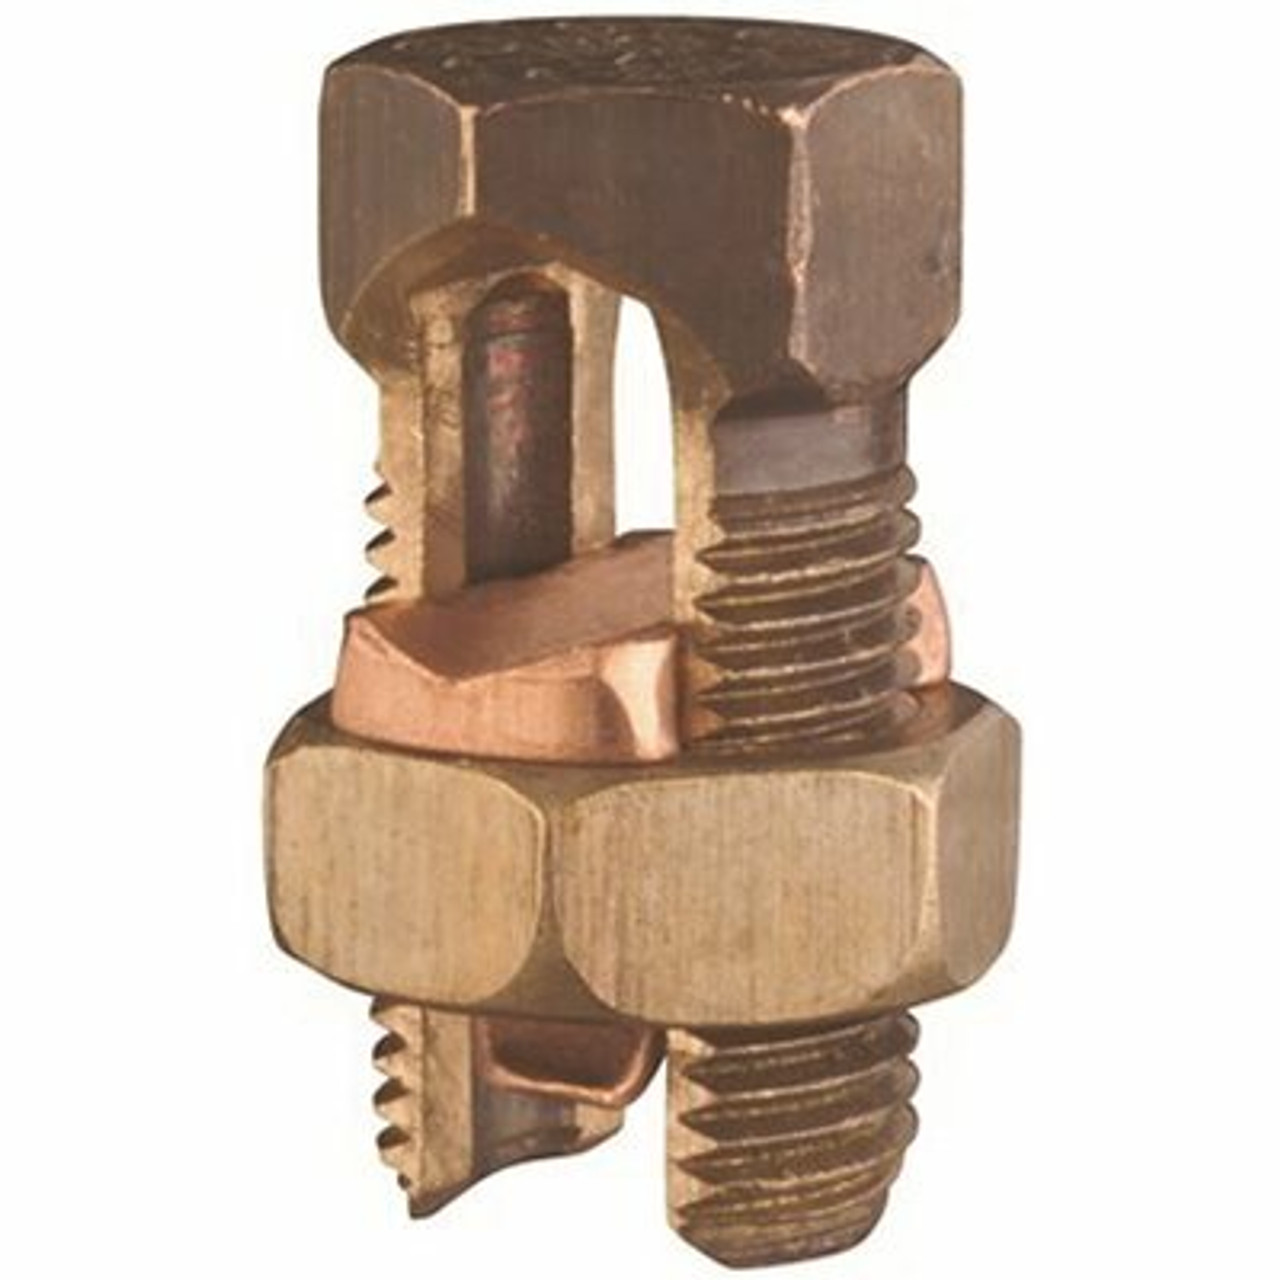 Split Bolt Connector, Equal Main And Tap Range 6 Sol-8 Sol, Conductor Range For Min Tap With One Max Main 14 Sol